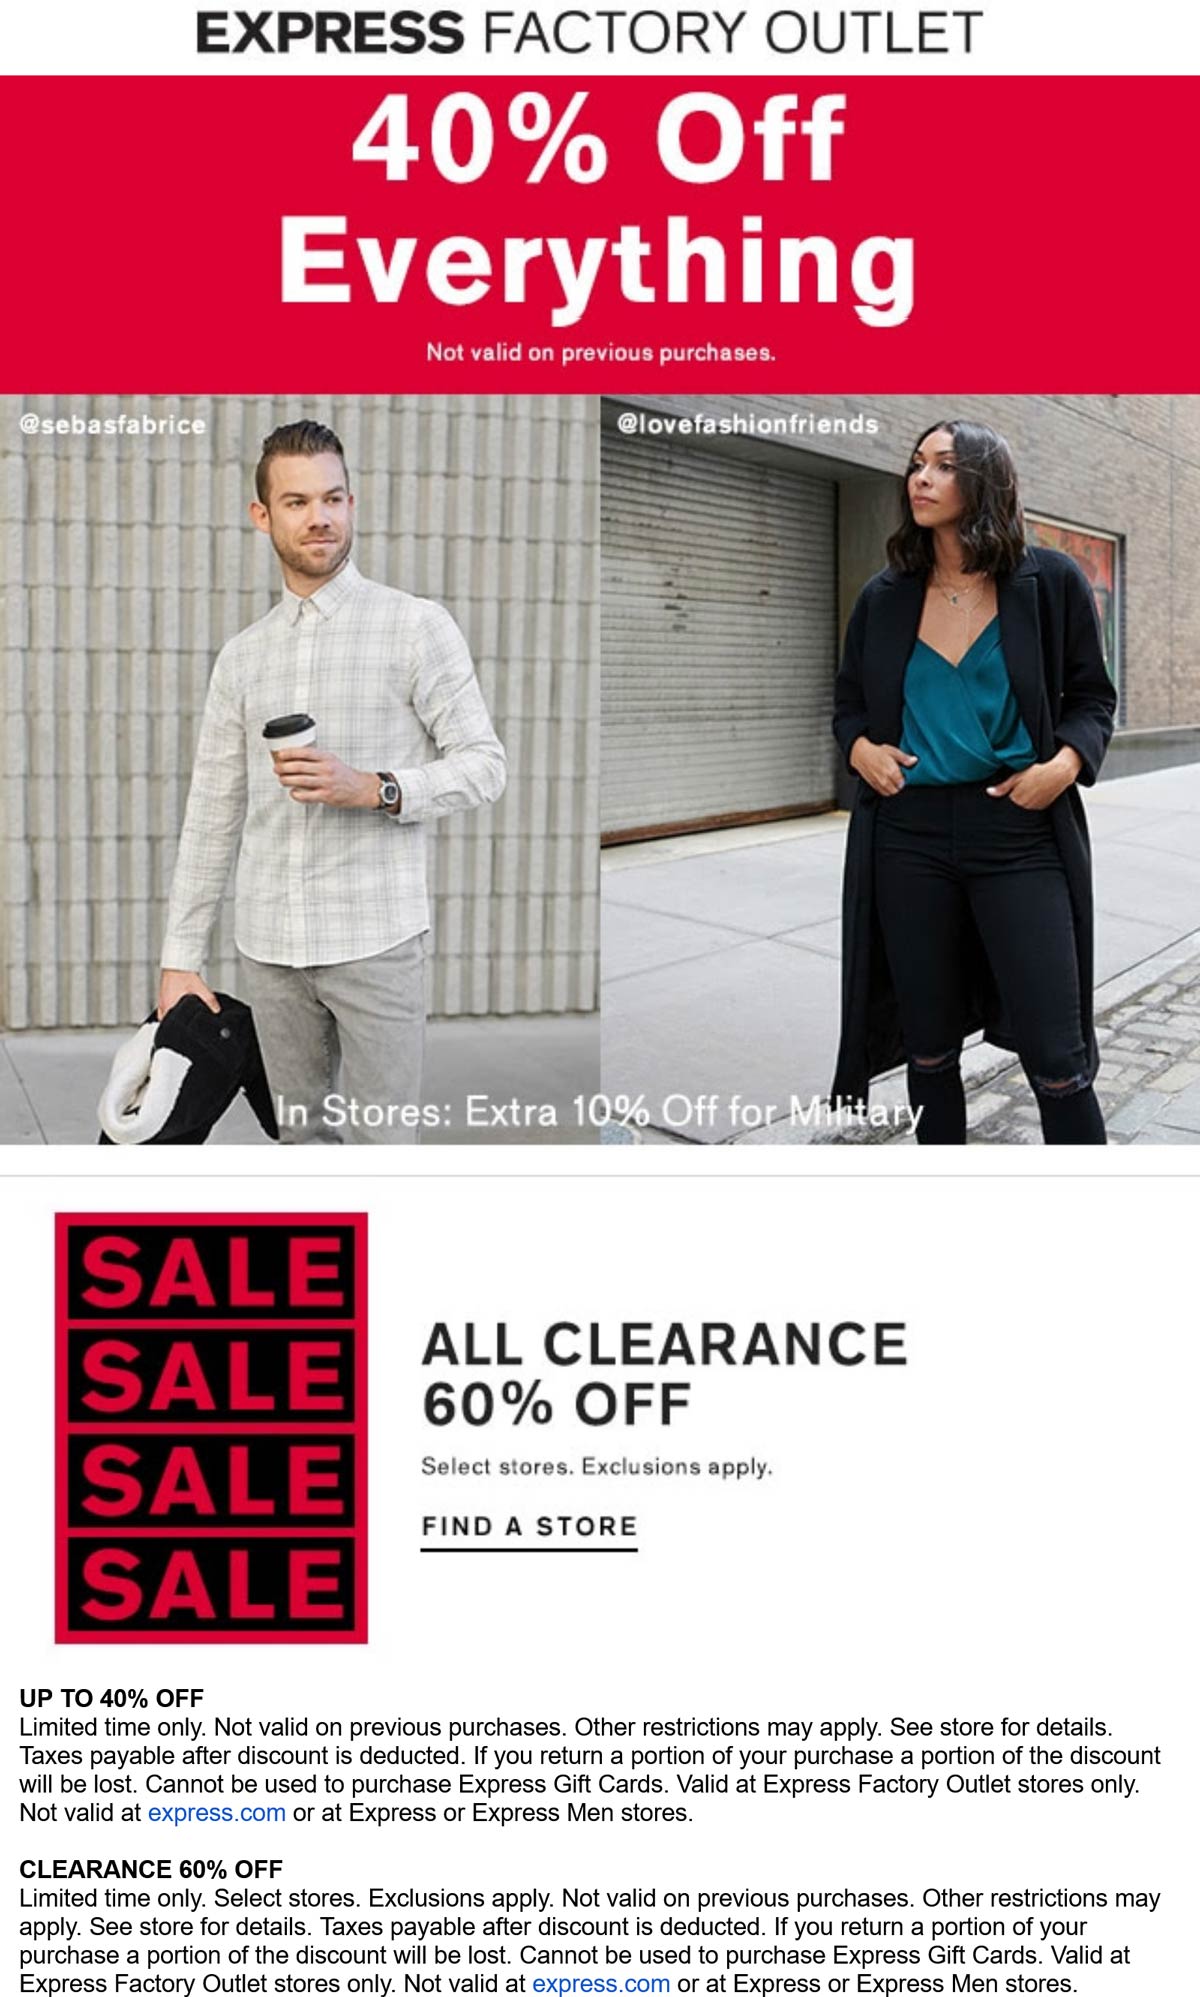 Express Factory Outlet stores Coupon  40% off everything & 60% off clearance at Express Factory Outlet #expressfactoryoutlet 